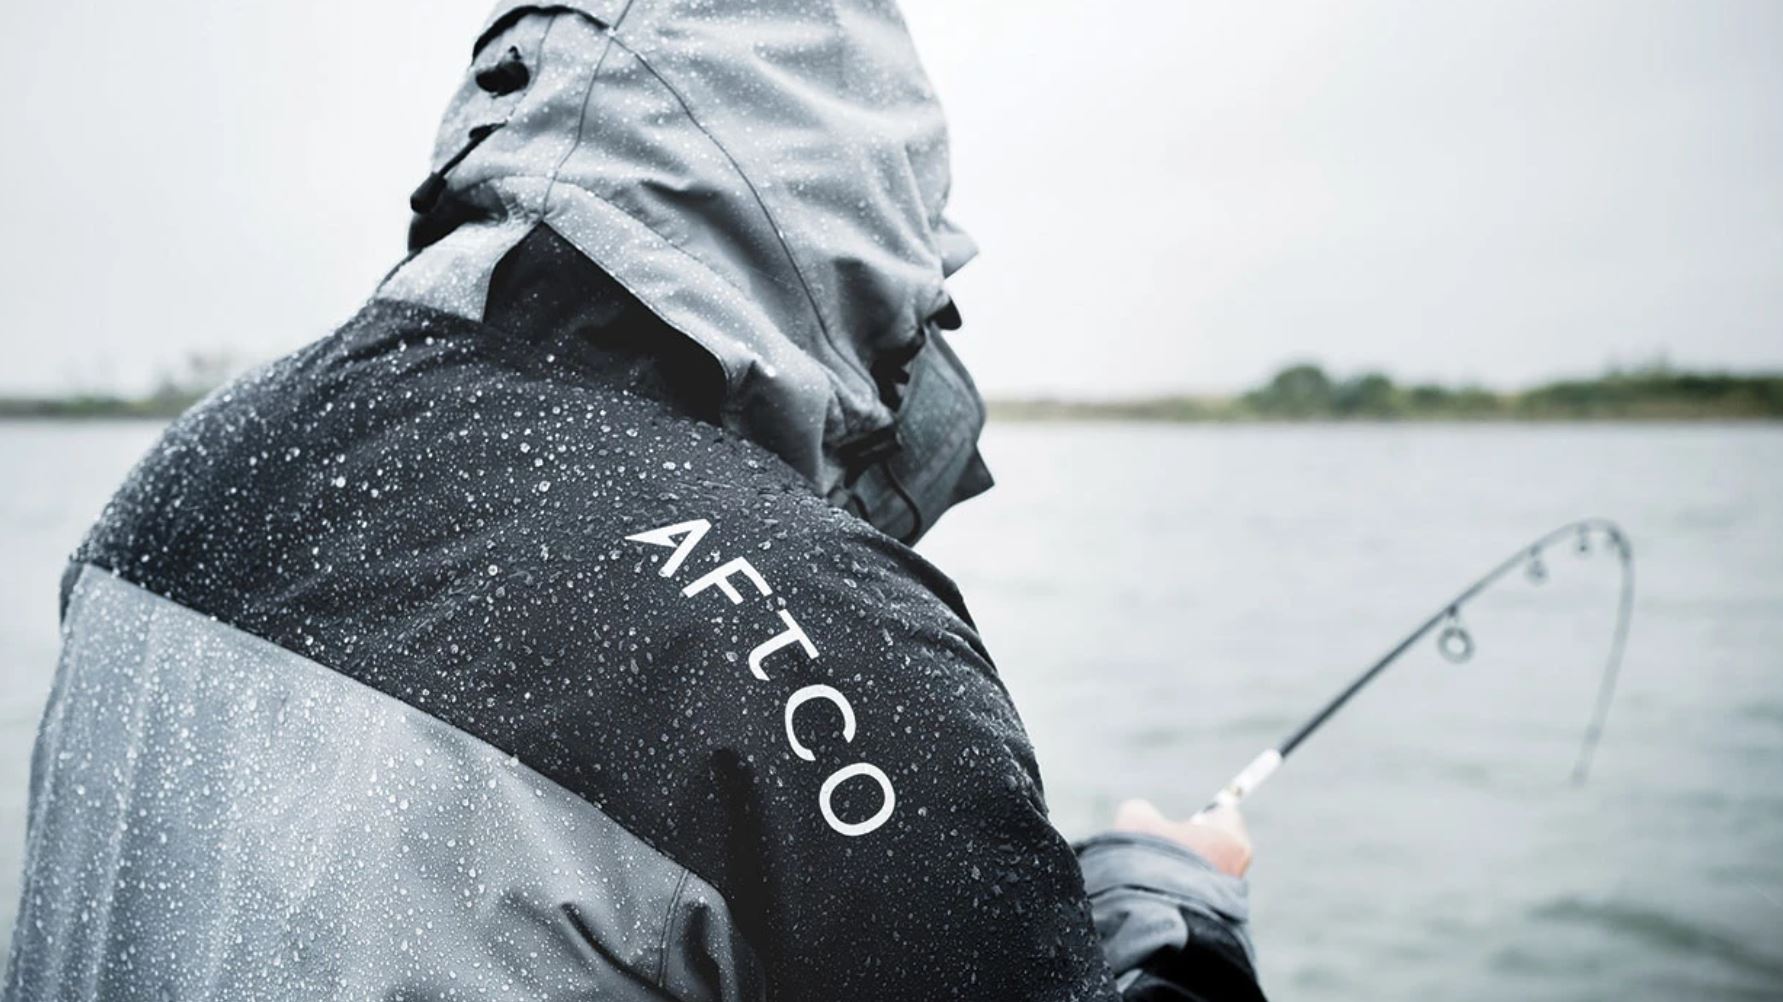 Selecting the Best Foul Weather Gear for Fishing